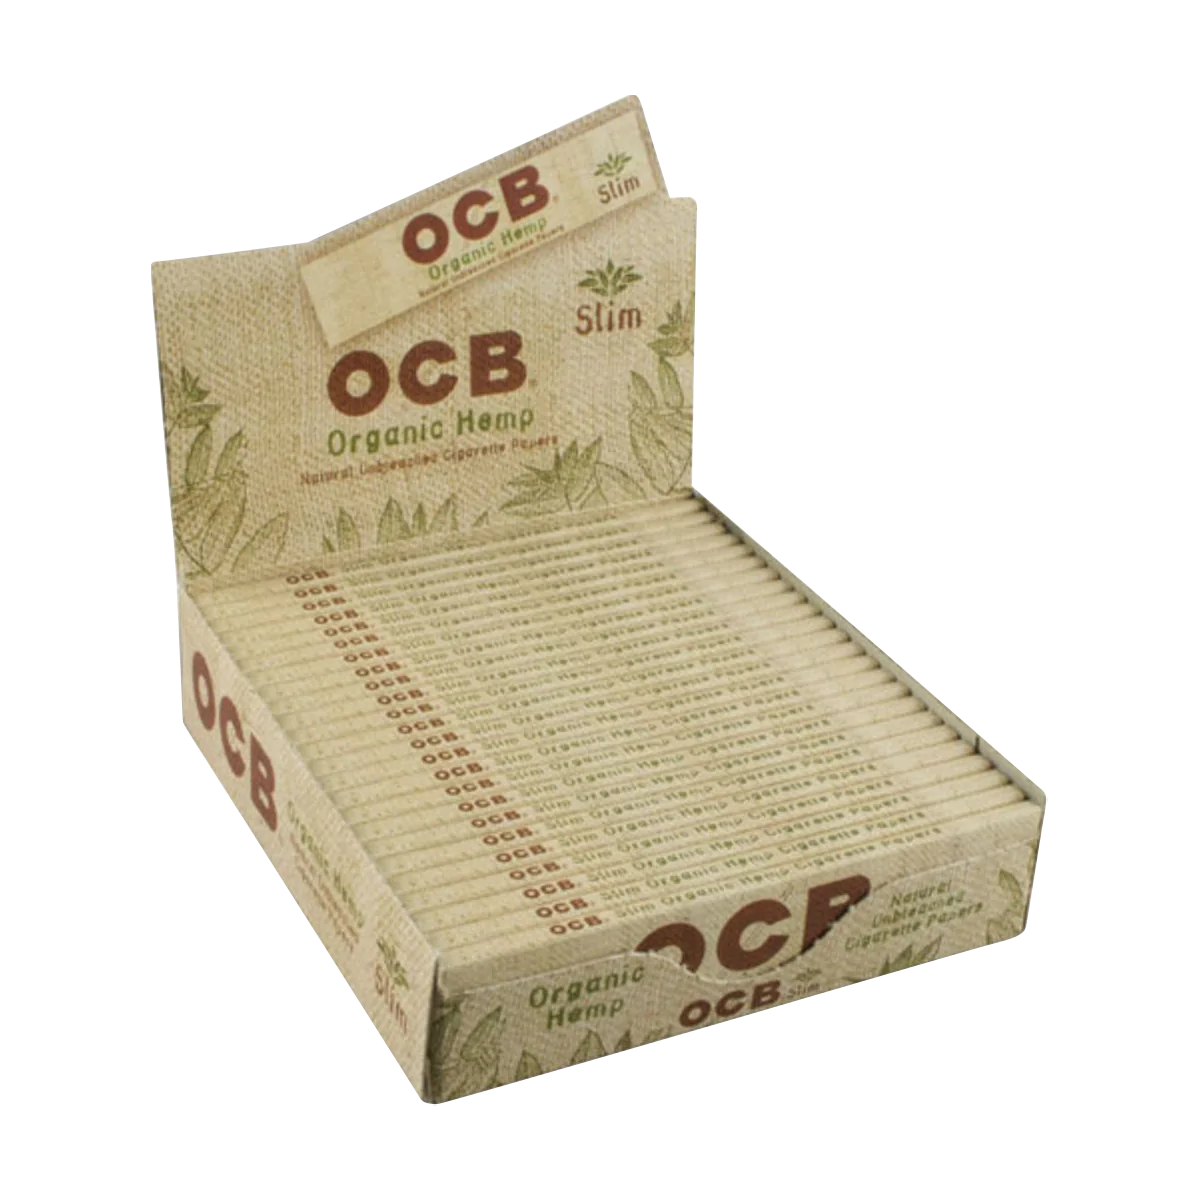 OCB Organic Hemp Slim Rolling Papers 24 Pack display box open from top view